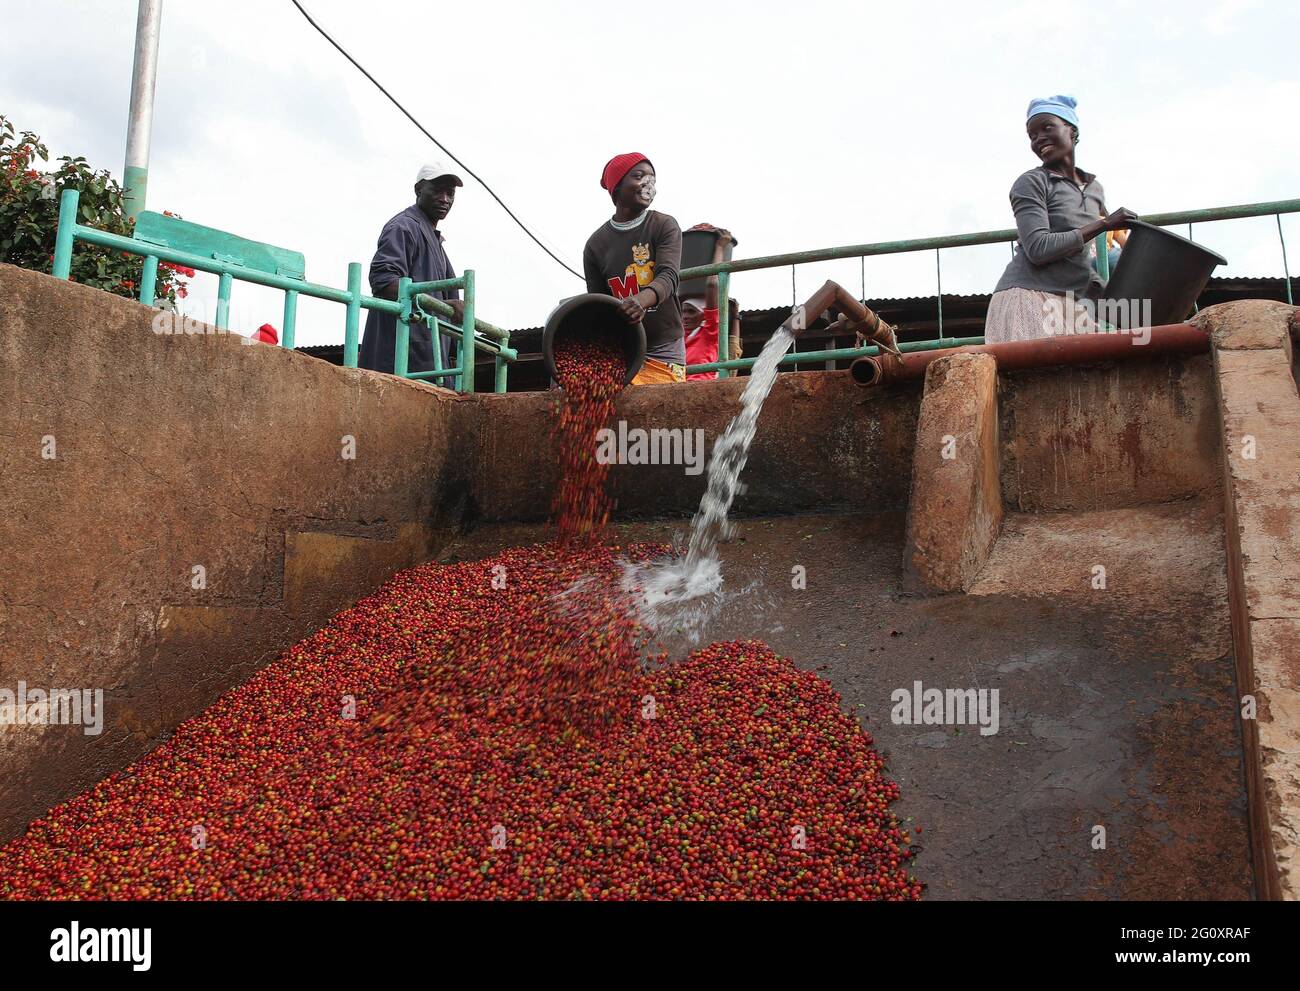 Ruiru, Kenya. 3rd June, 2021. A worker pours coffee beans to a cleaning station at a coffee estate in Ruiru, a suburb on the outskirts of Nairobi, Kenya, on June 3, 2021. Recently, Kenya entered the coffee bean harvest season. Coffee is one of the major foreign exchange earners for Kenya, with the crop contributing about six percent of total export earnings and 0.3 percent of the country's gross domestic product. Credit: Long Lei/Xinhua/Alamy Live News Stock Photo